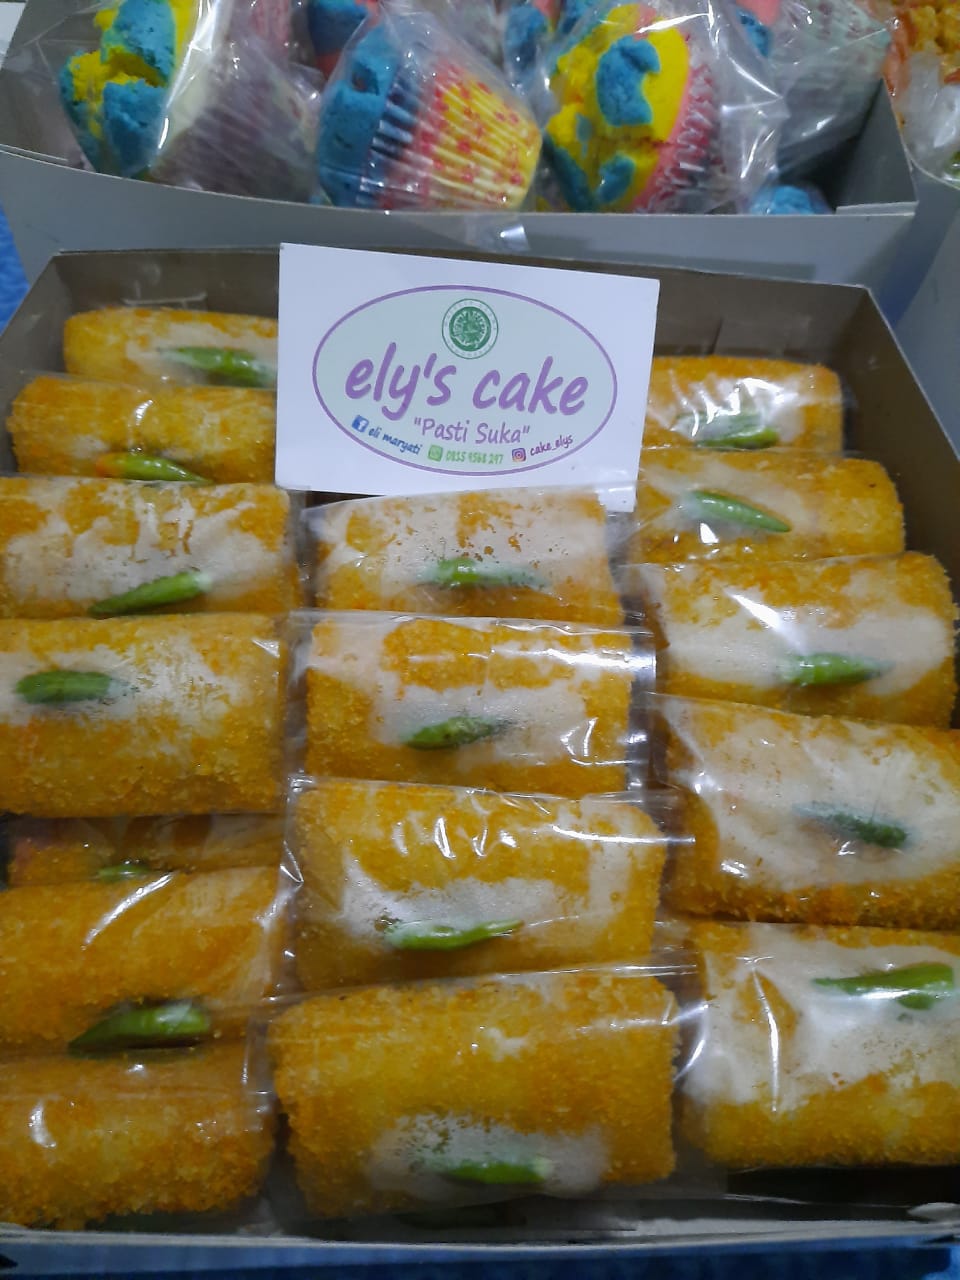 Cake Sosis Ayam Solo Rp. 2,500,- - Rp. 3,500,- / Pc